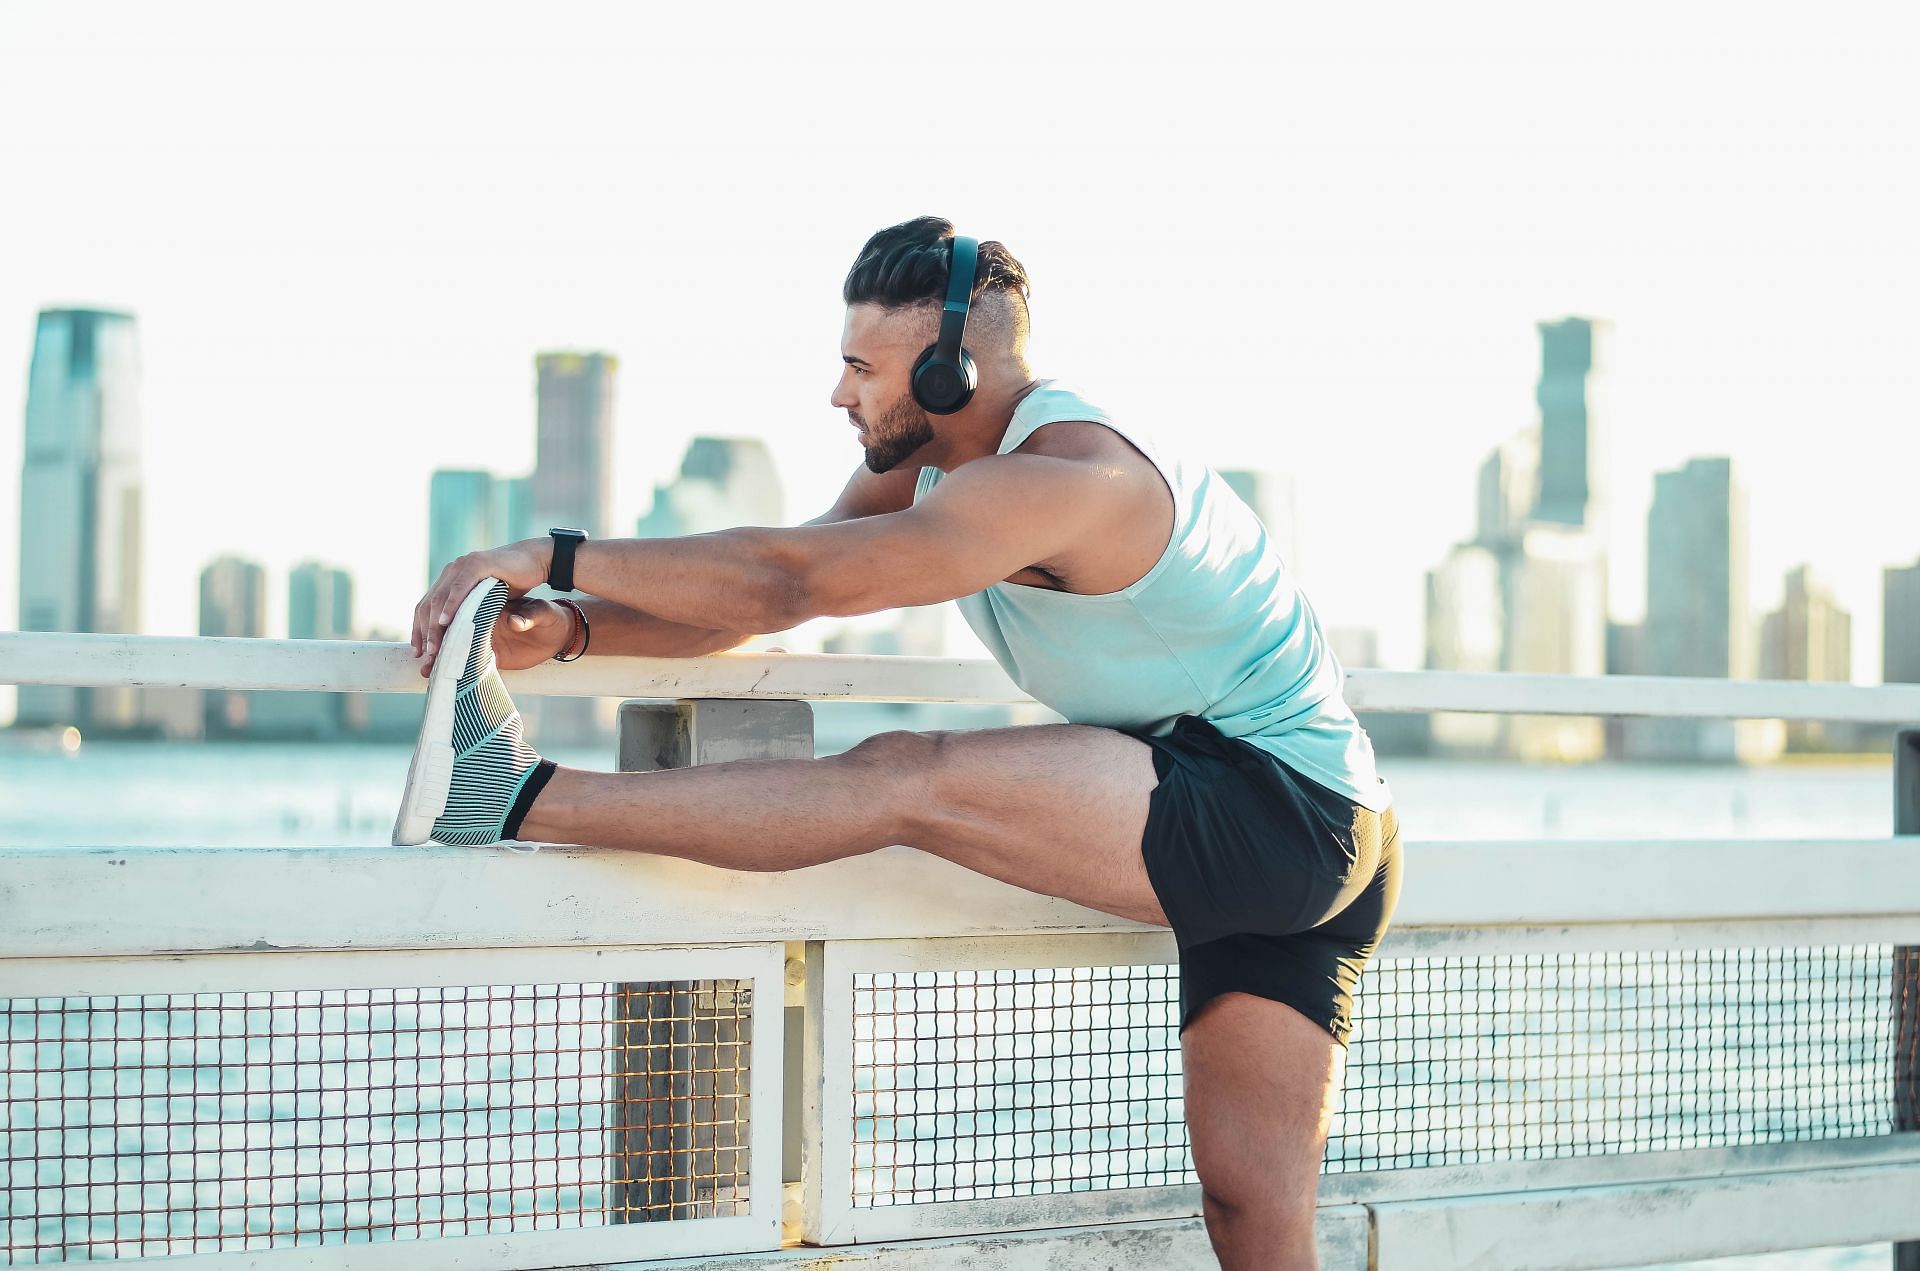 Regular stretching exercises reduce muscular tension all over the body. (Image via Unsplash/ Michael Demoya)